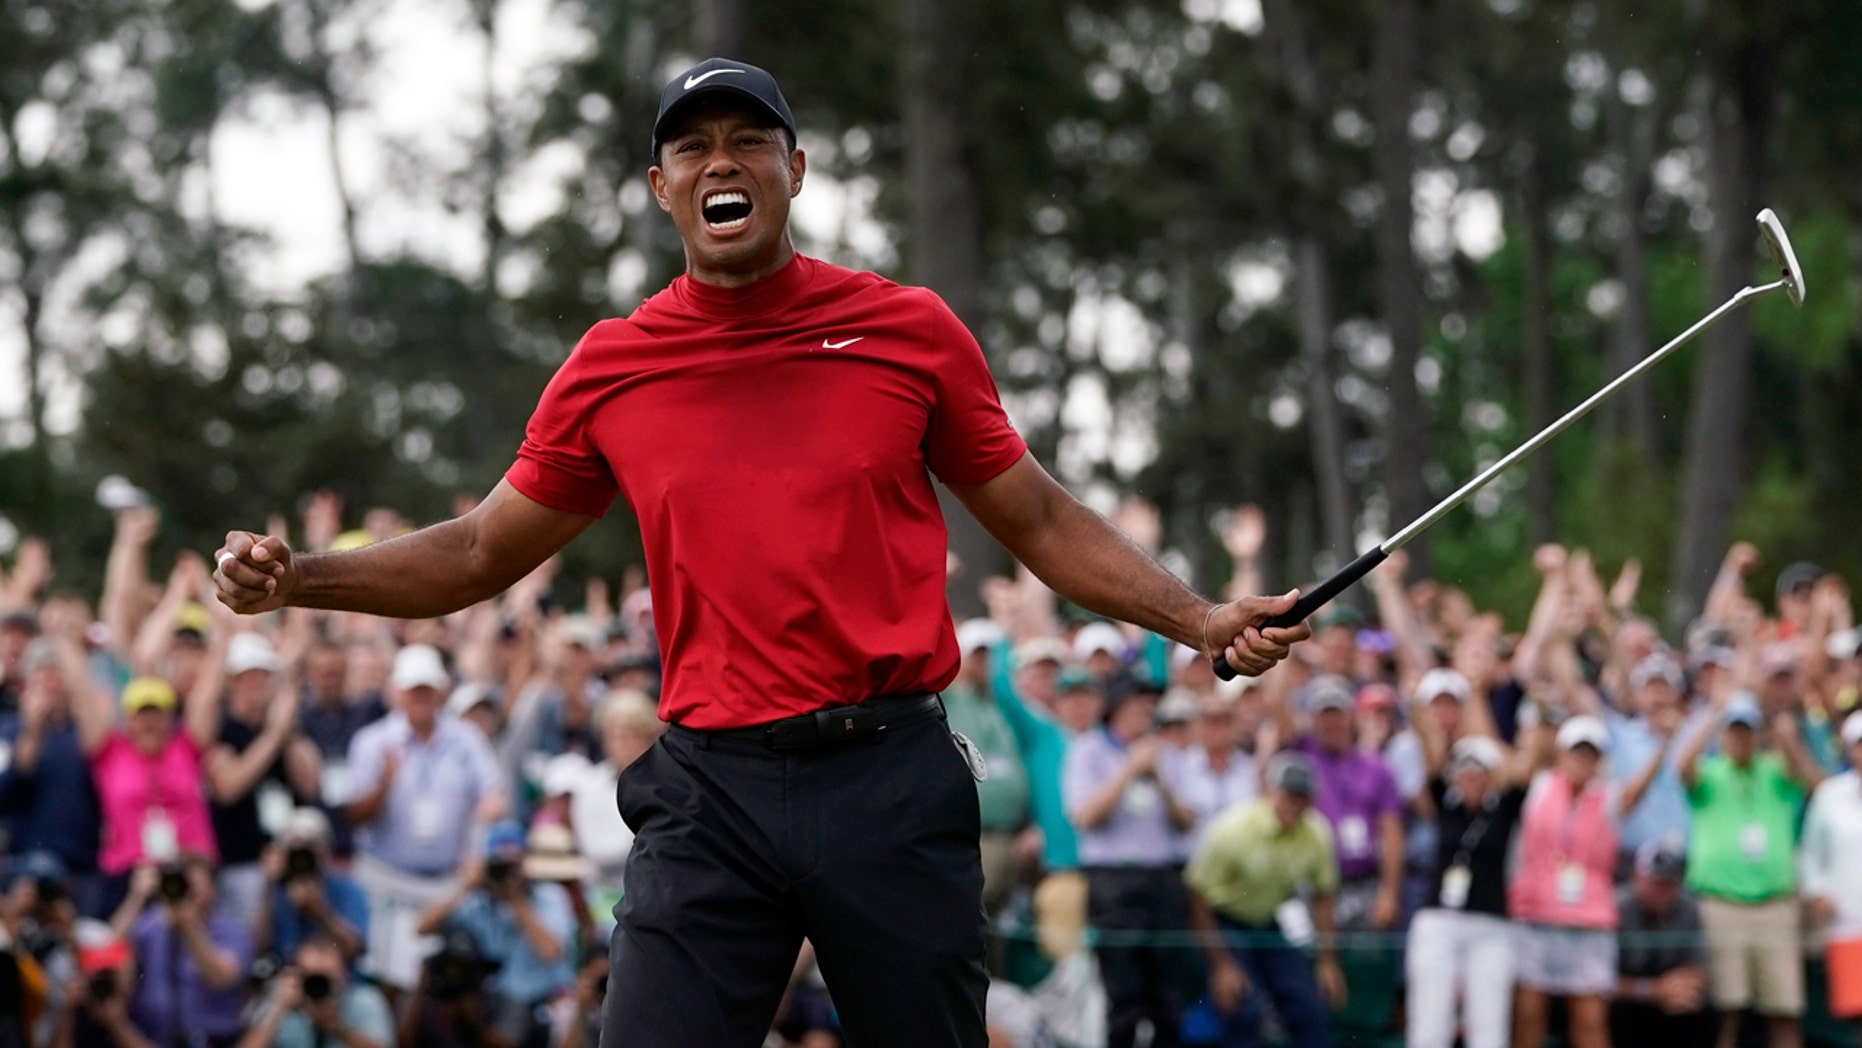 Tiger Woods reacts while he wins the Masters golf tournament on Sunday, April 14, 2019 in Augusta, Georgia (AP Photo / David J. Phillip)